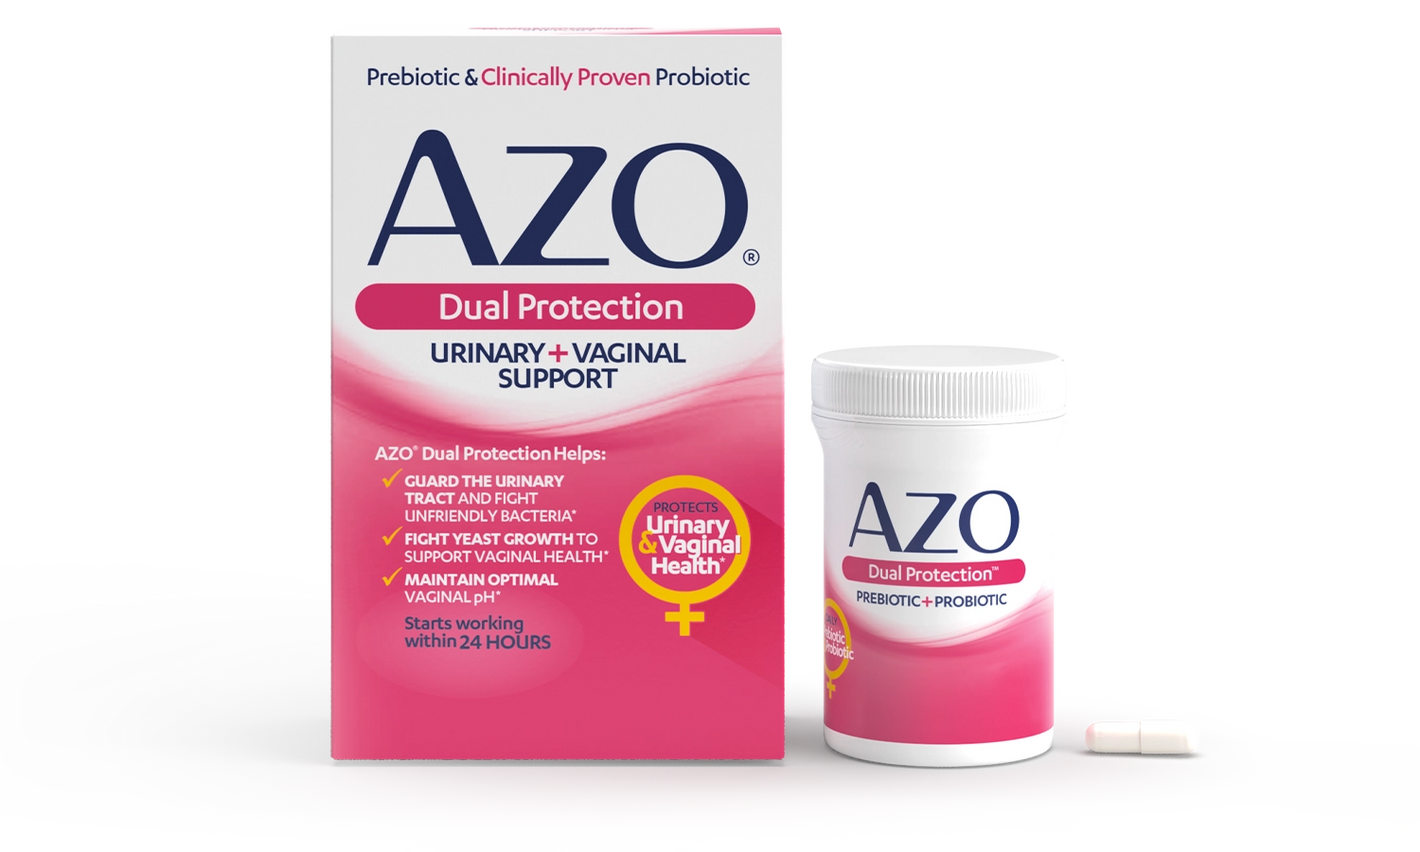 azo-urinary-products-protect-dual-protection